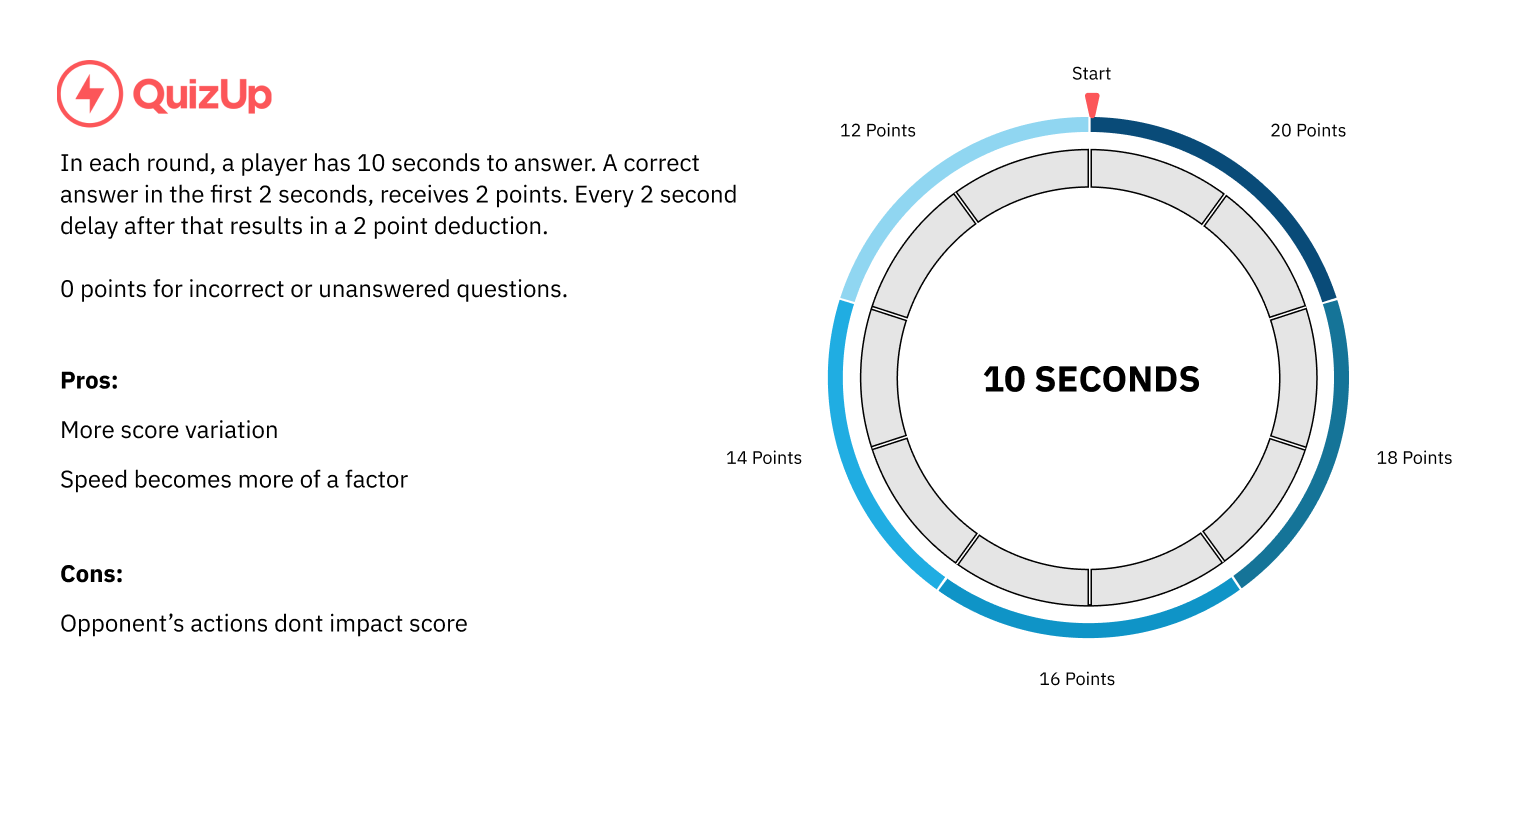 Analysis of QuizUp's scoring system. In each round a player has 10 seconds to answer. A correct answer in the first 2 seconds receives 2 points. Every 2 second delay after that results in a 2 point deduction. 0 points for incorrect answers or unanswered questions. Pros: More score variation Speed becomes more of a factor Cons: Opponent's actions don't impact scores.